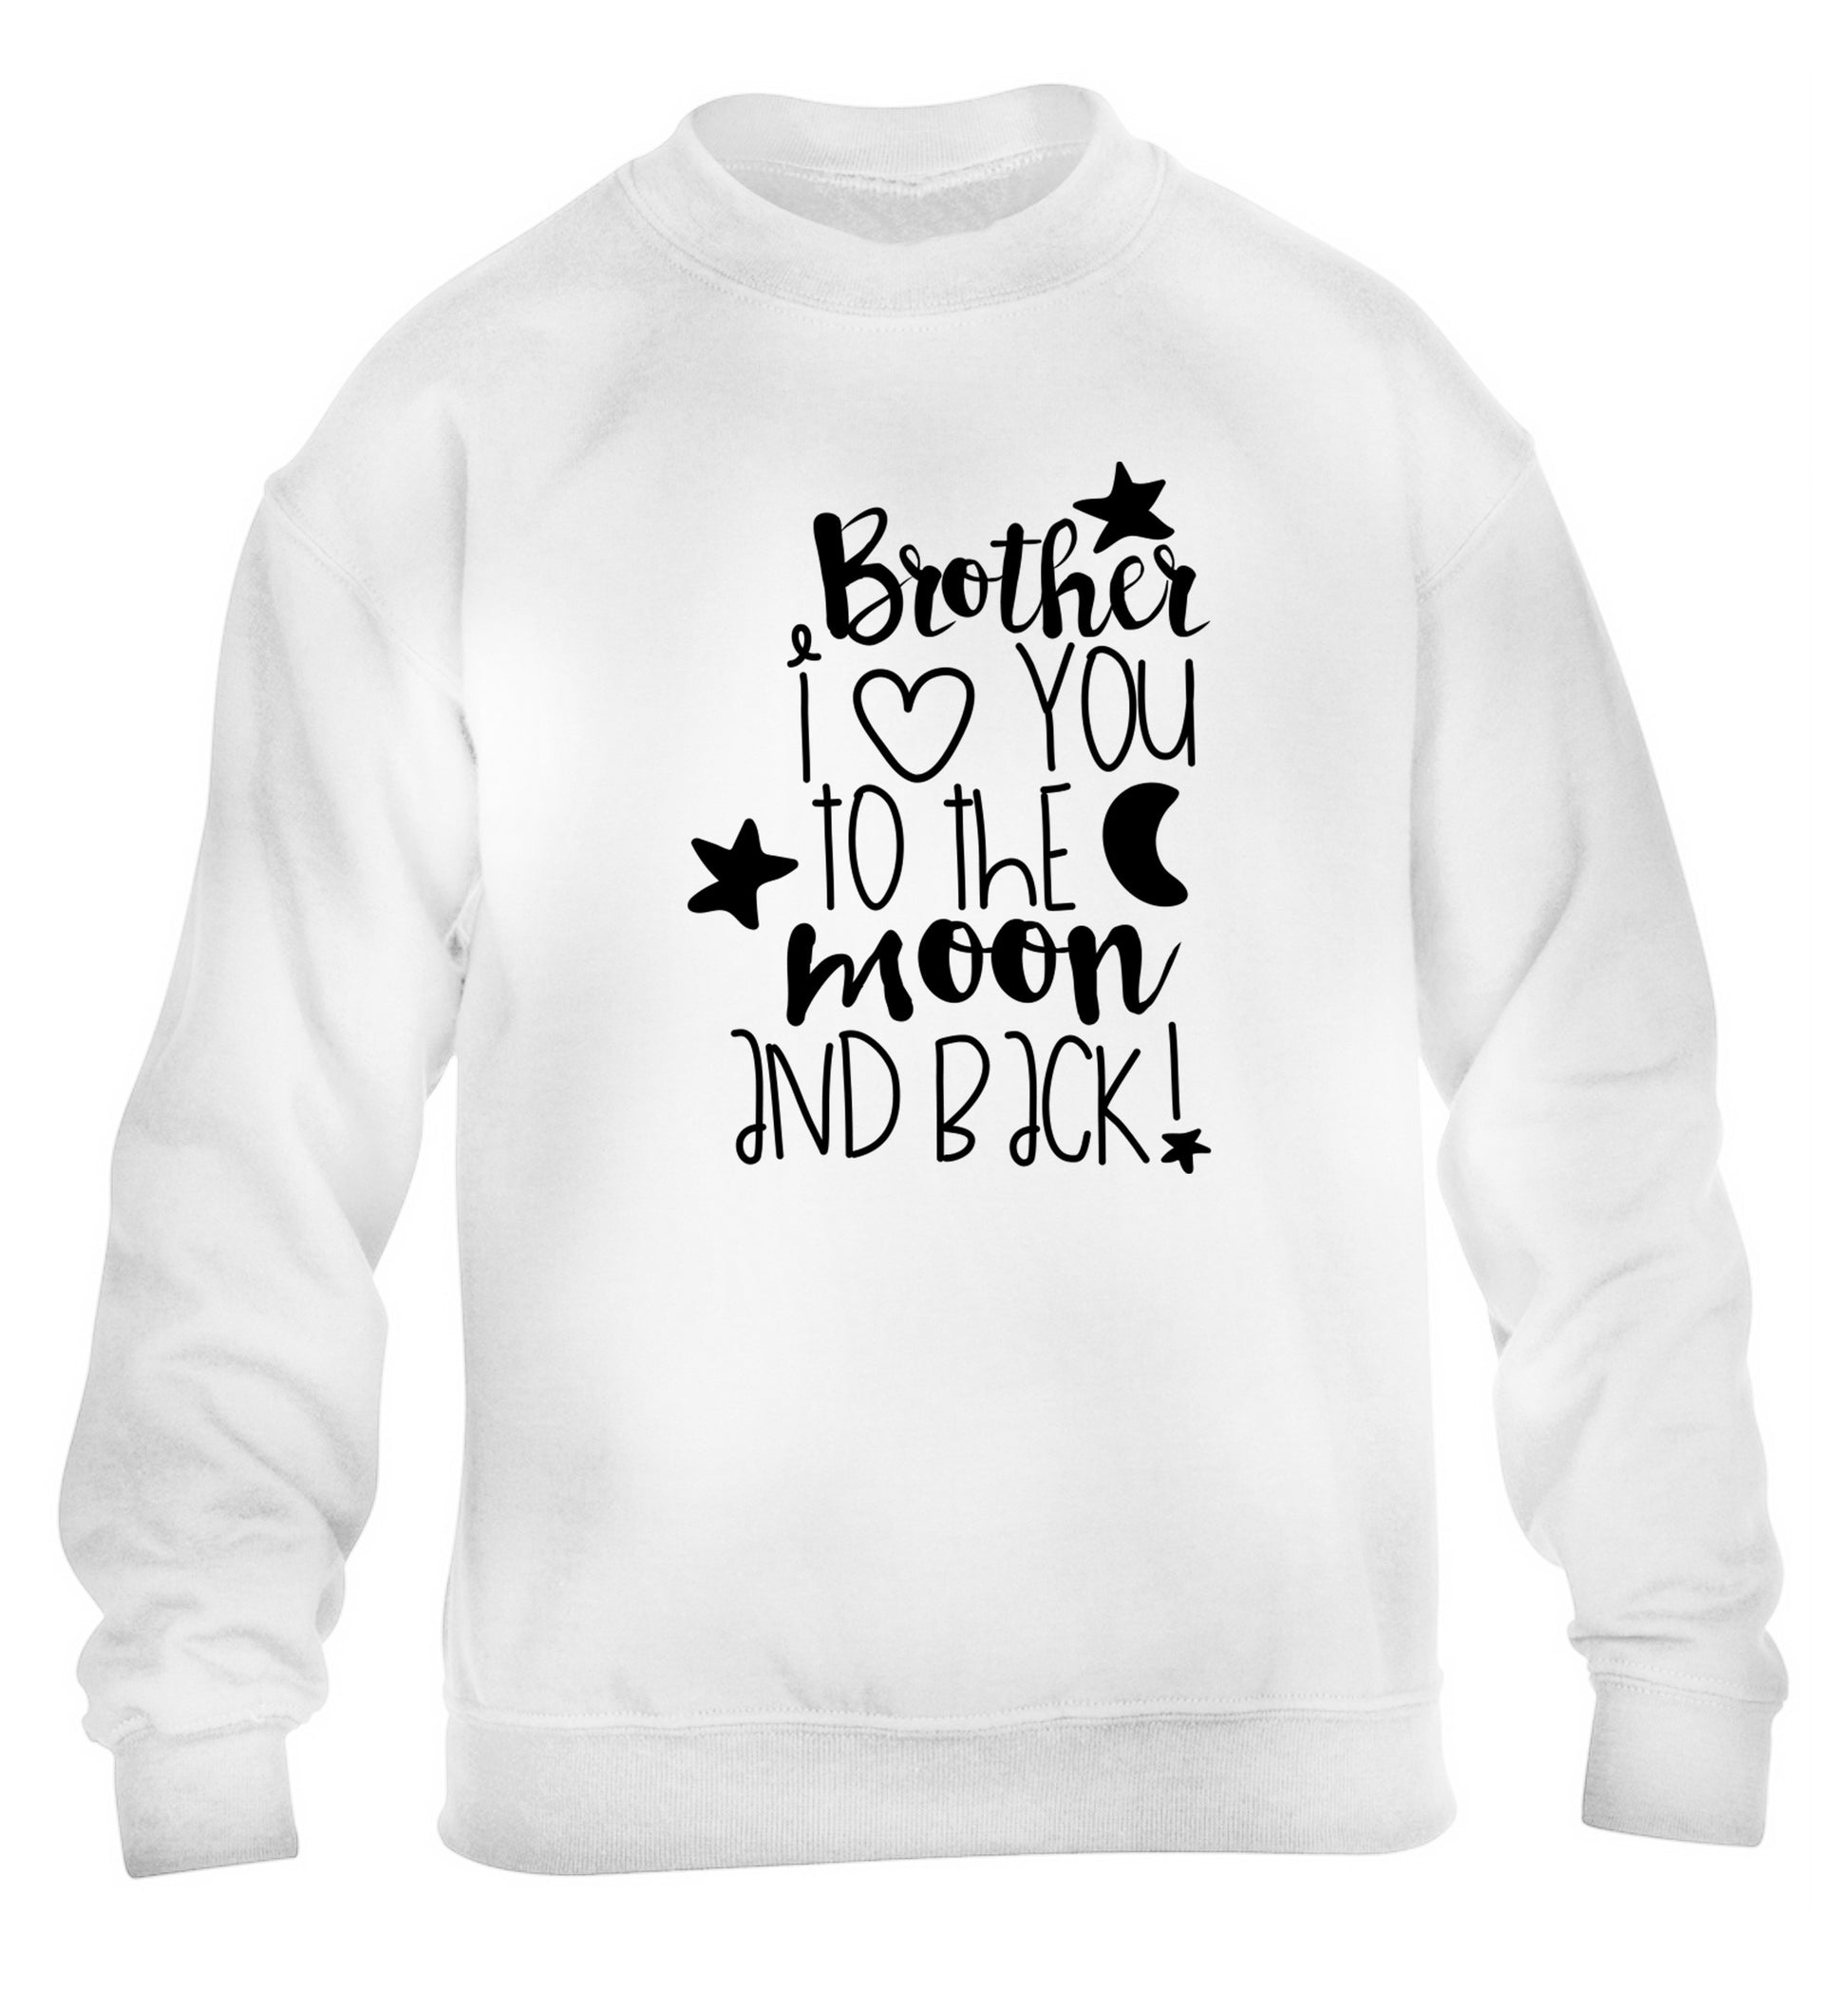 Brother I love you to the moon and back children's white  sweater 12-14 Years